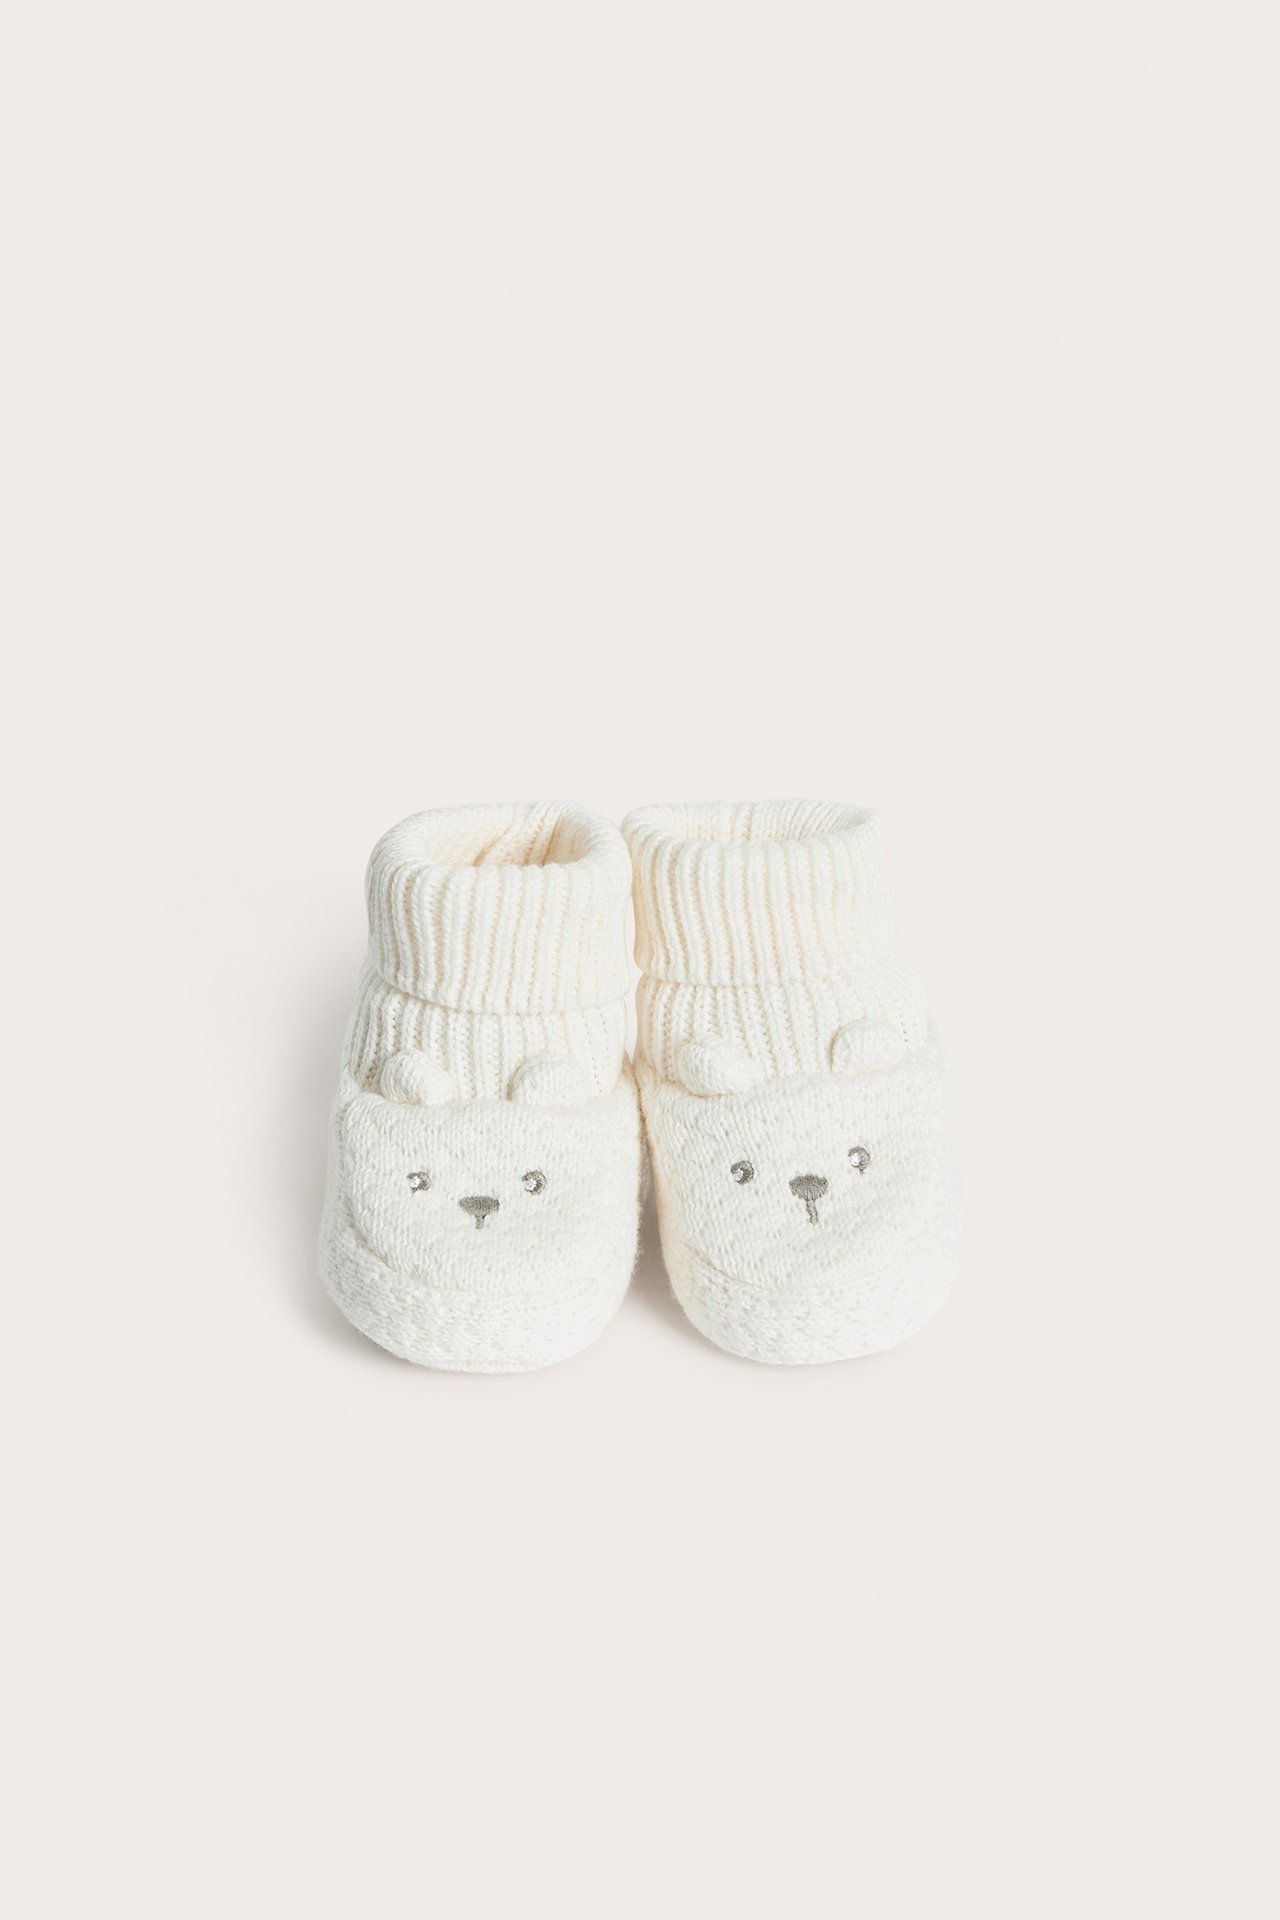 Tossor baby - Offwhite - 2